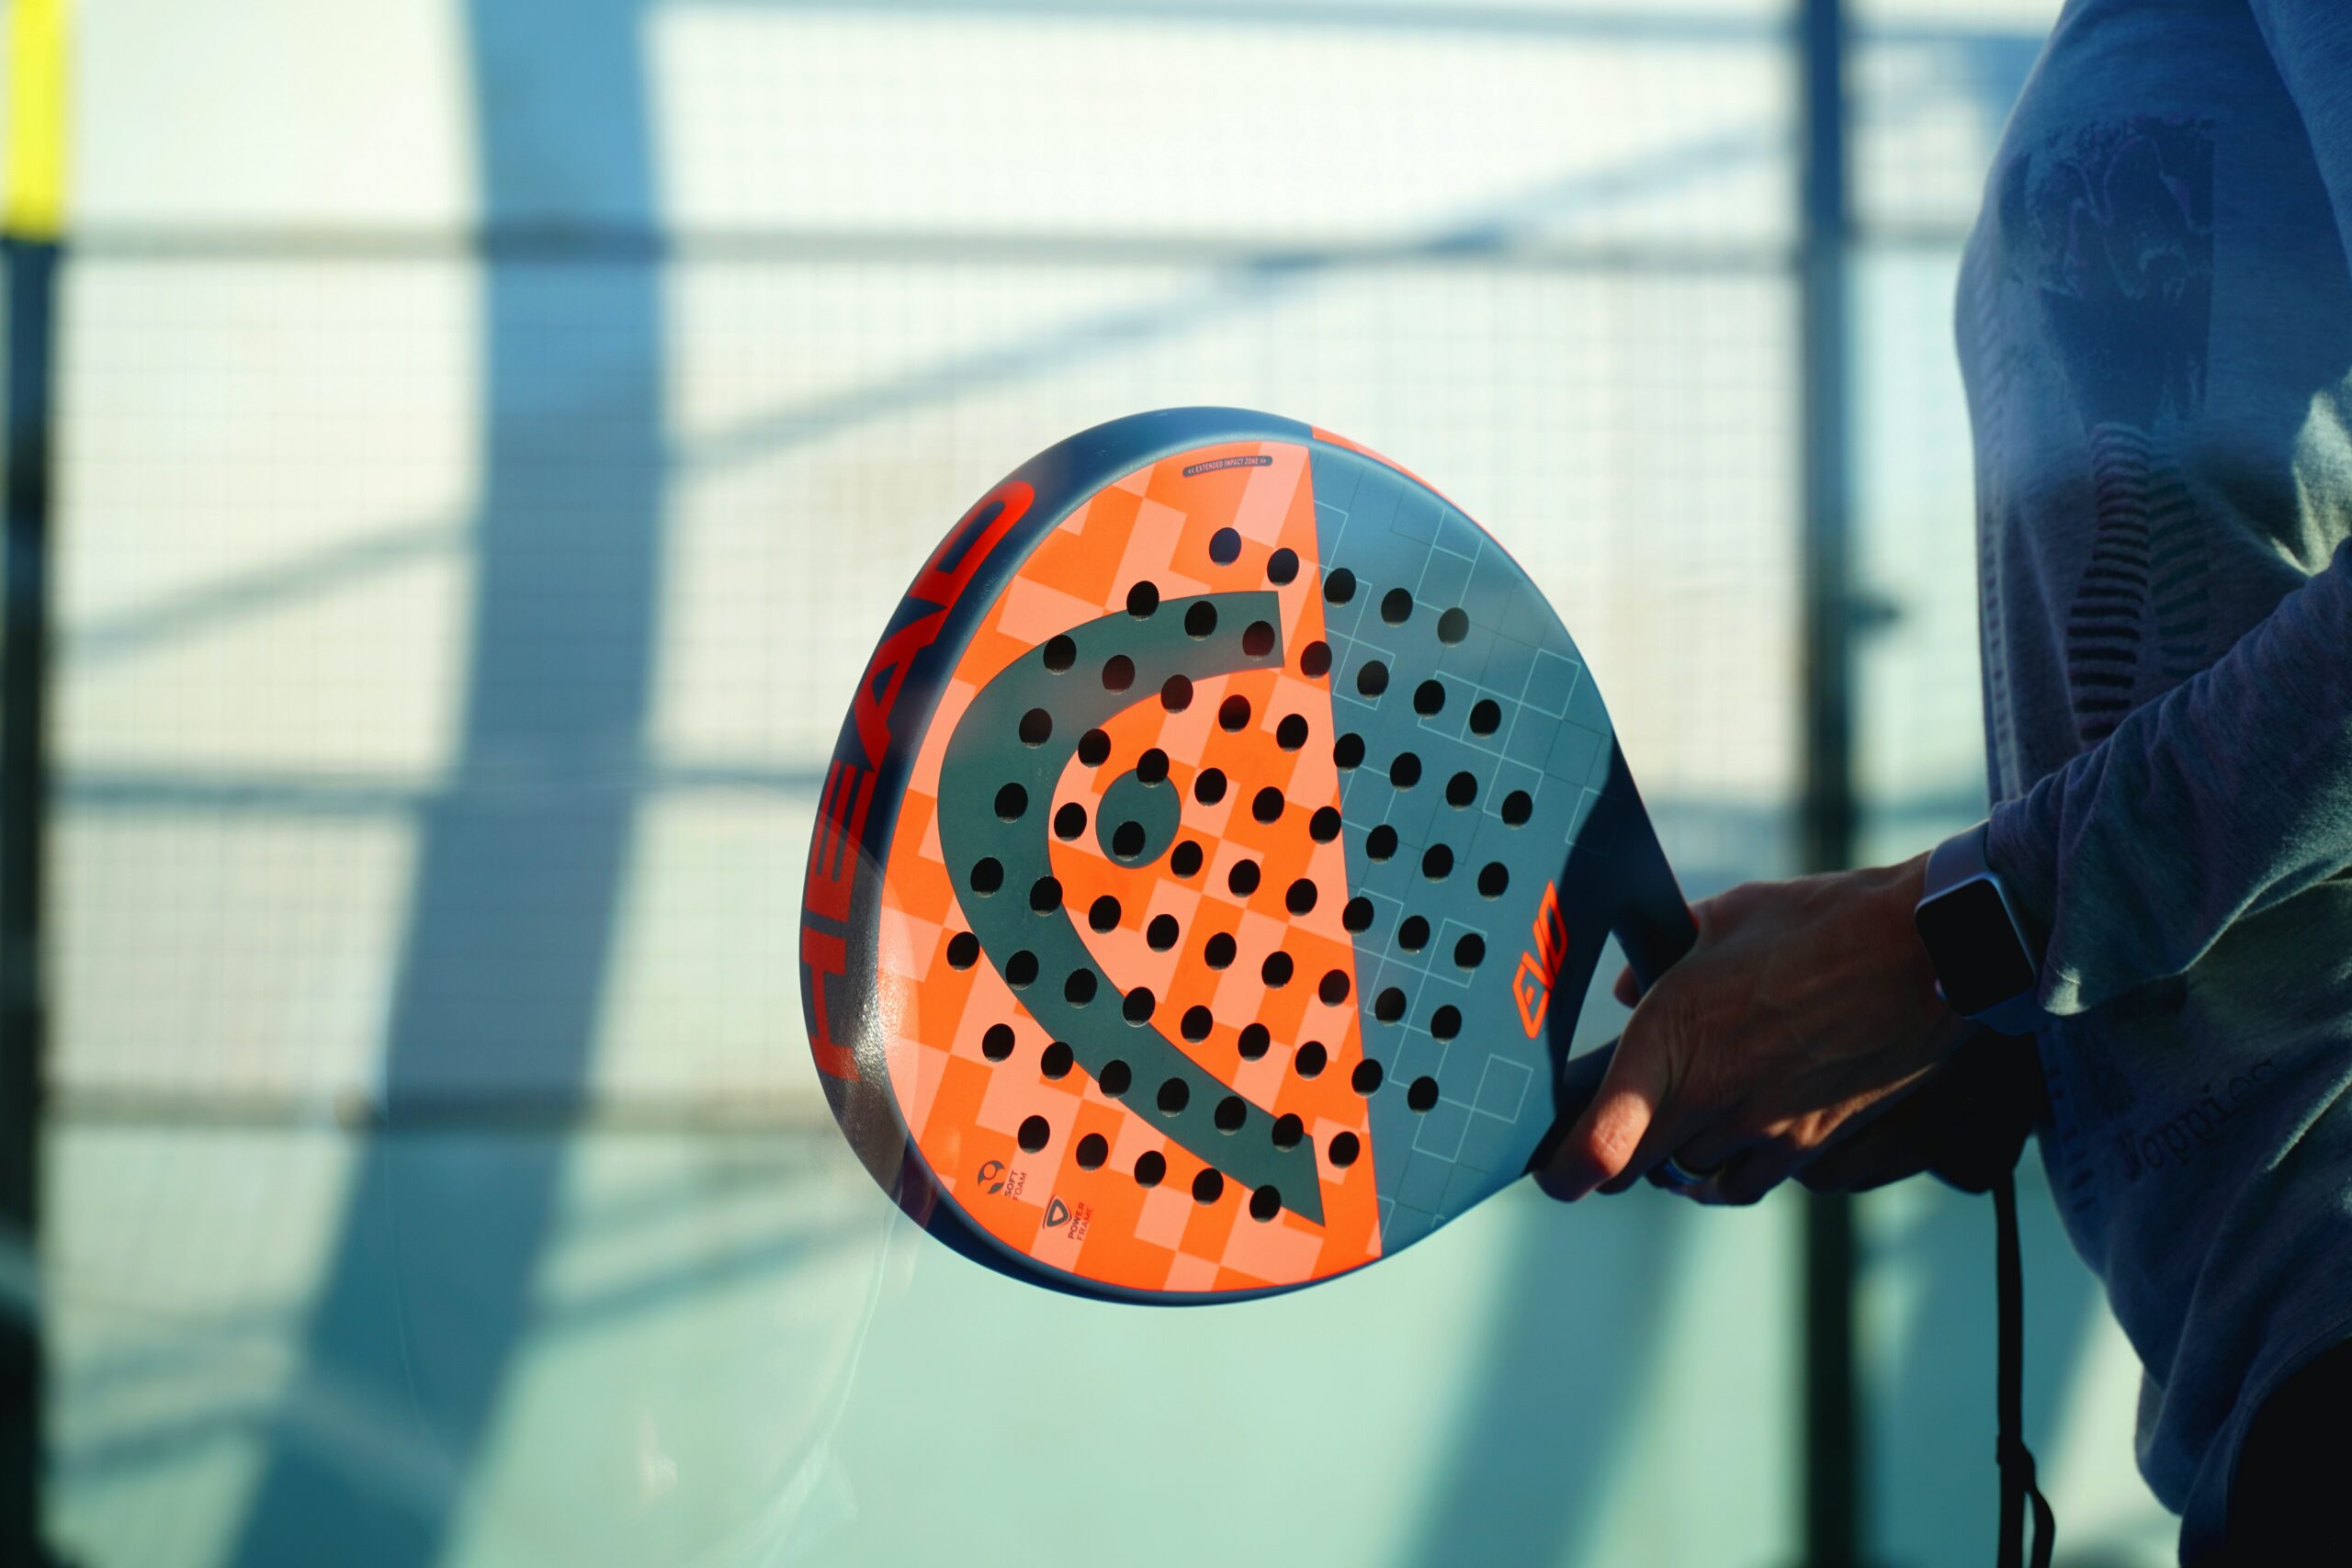 Why Padel is the Next Big Thing in American Sports – Racquet Point